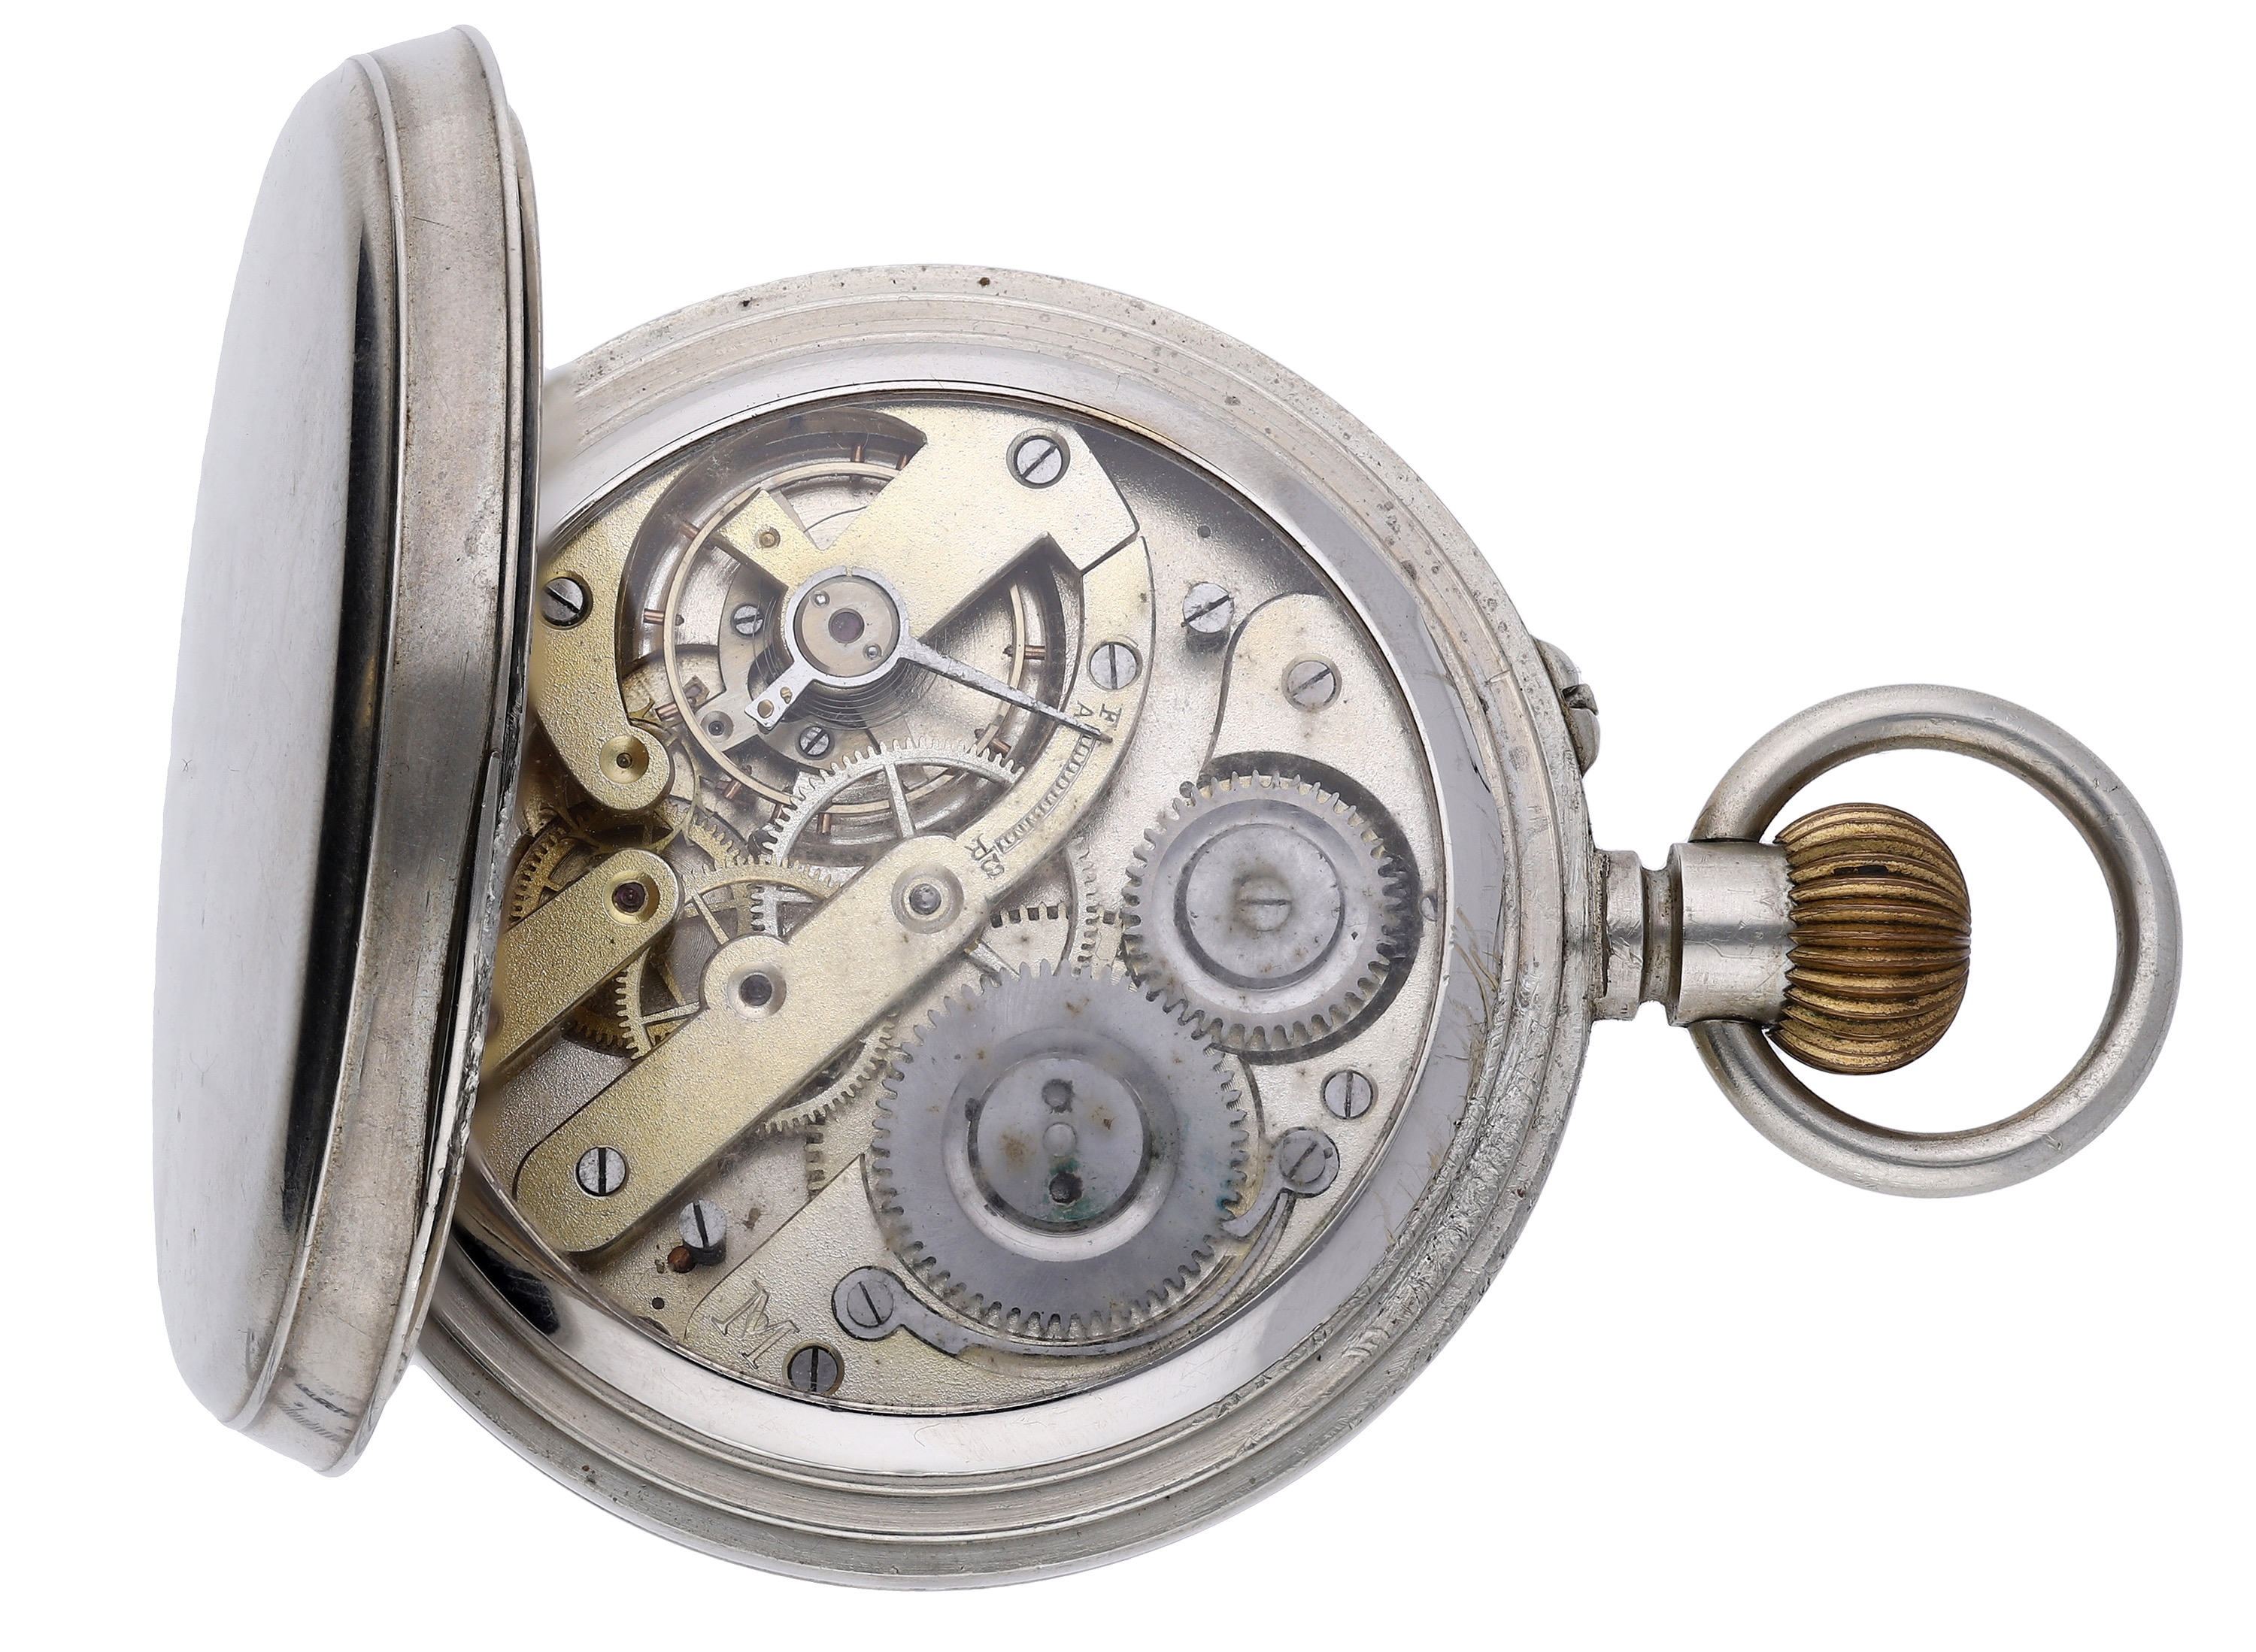 Swiss. A desk set with Goliath watch, thermometer and barometer, circa 1900 Movement: manual win... - Image 4 of 4